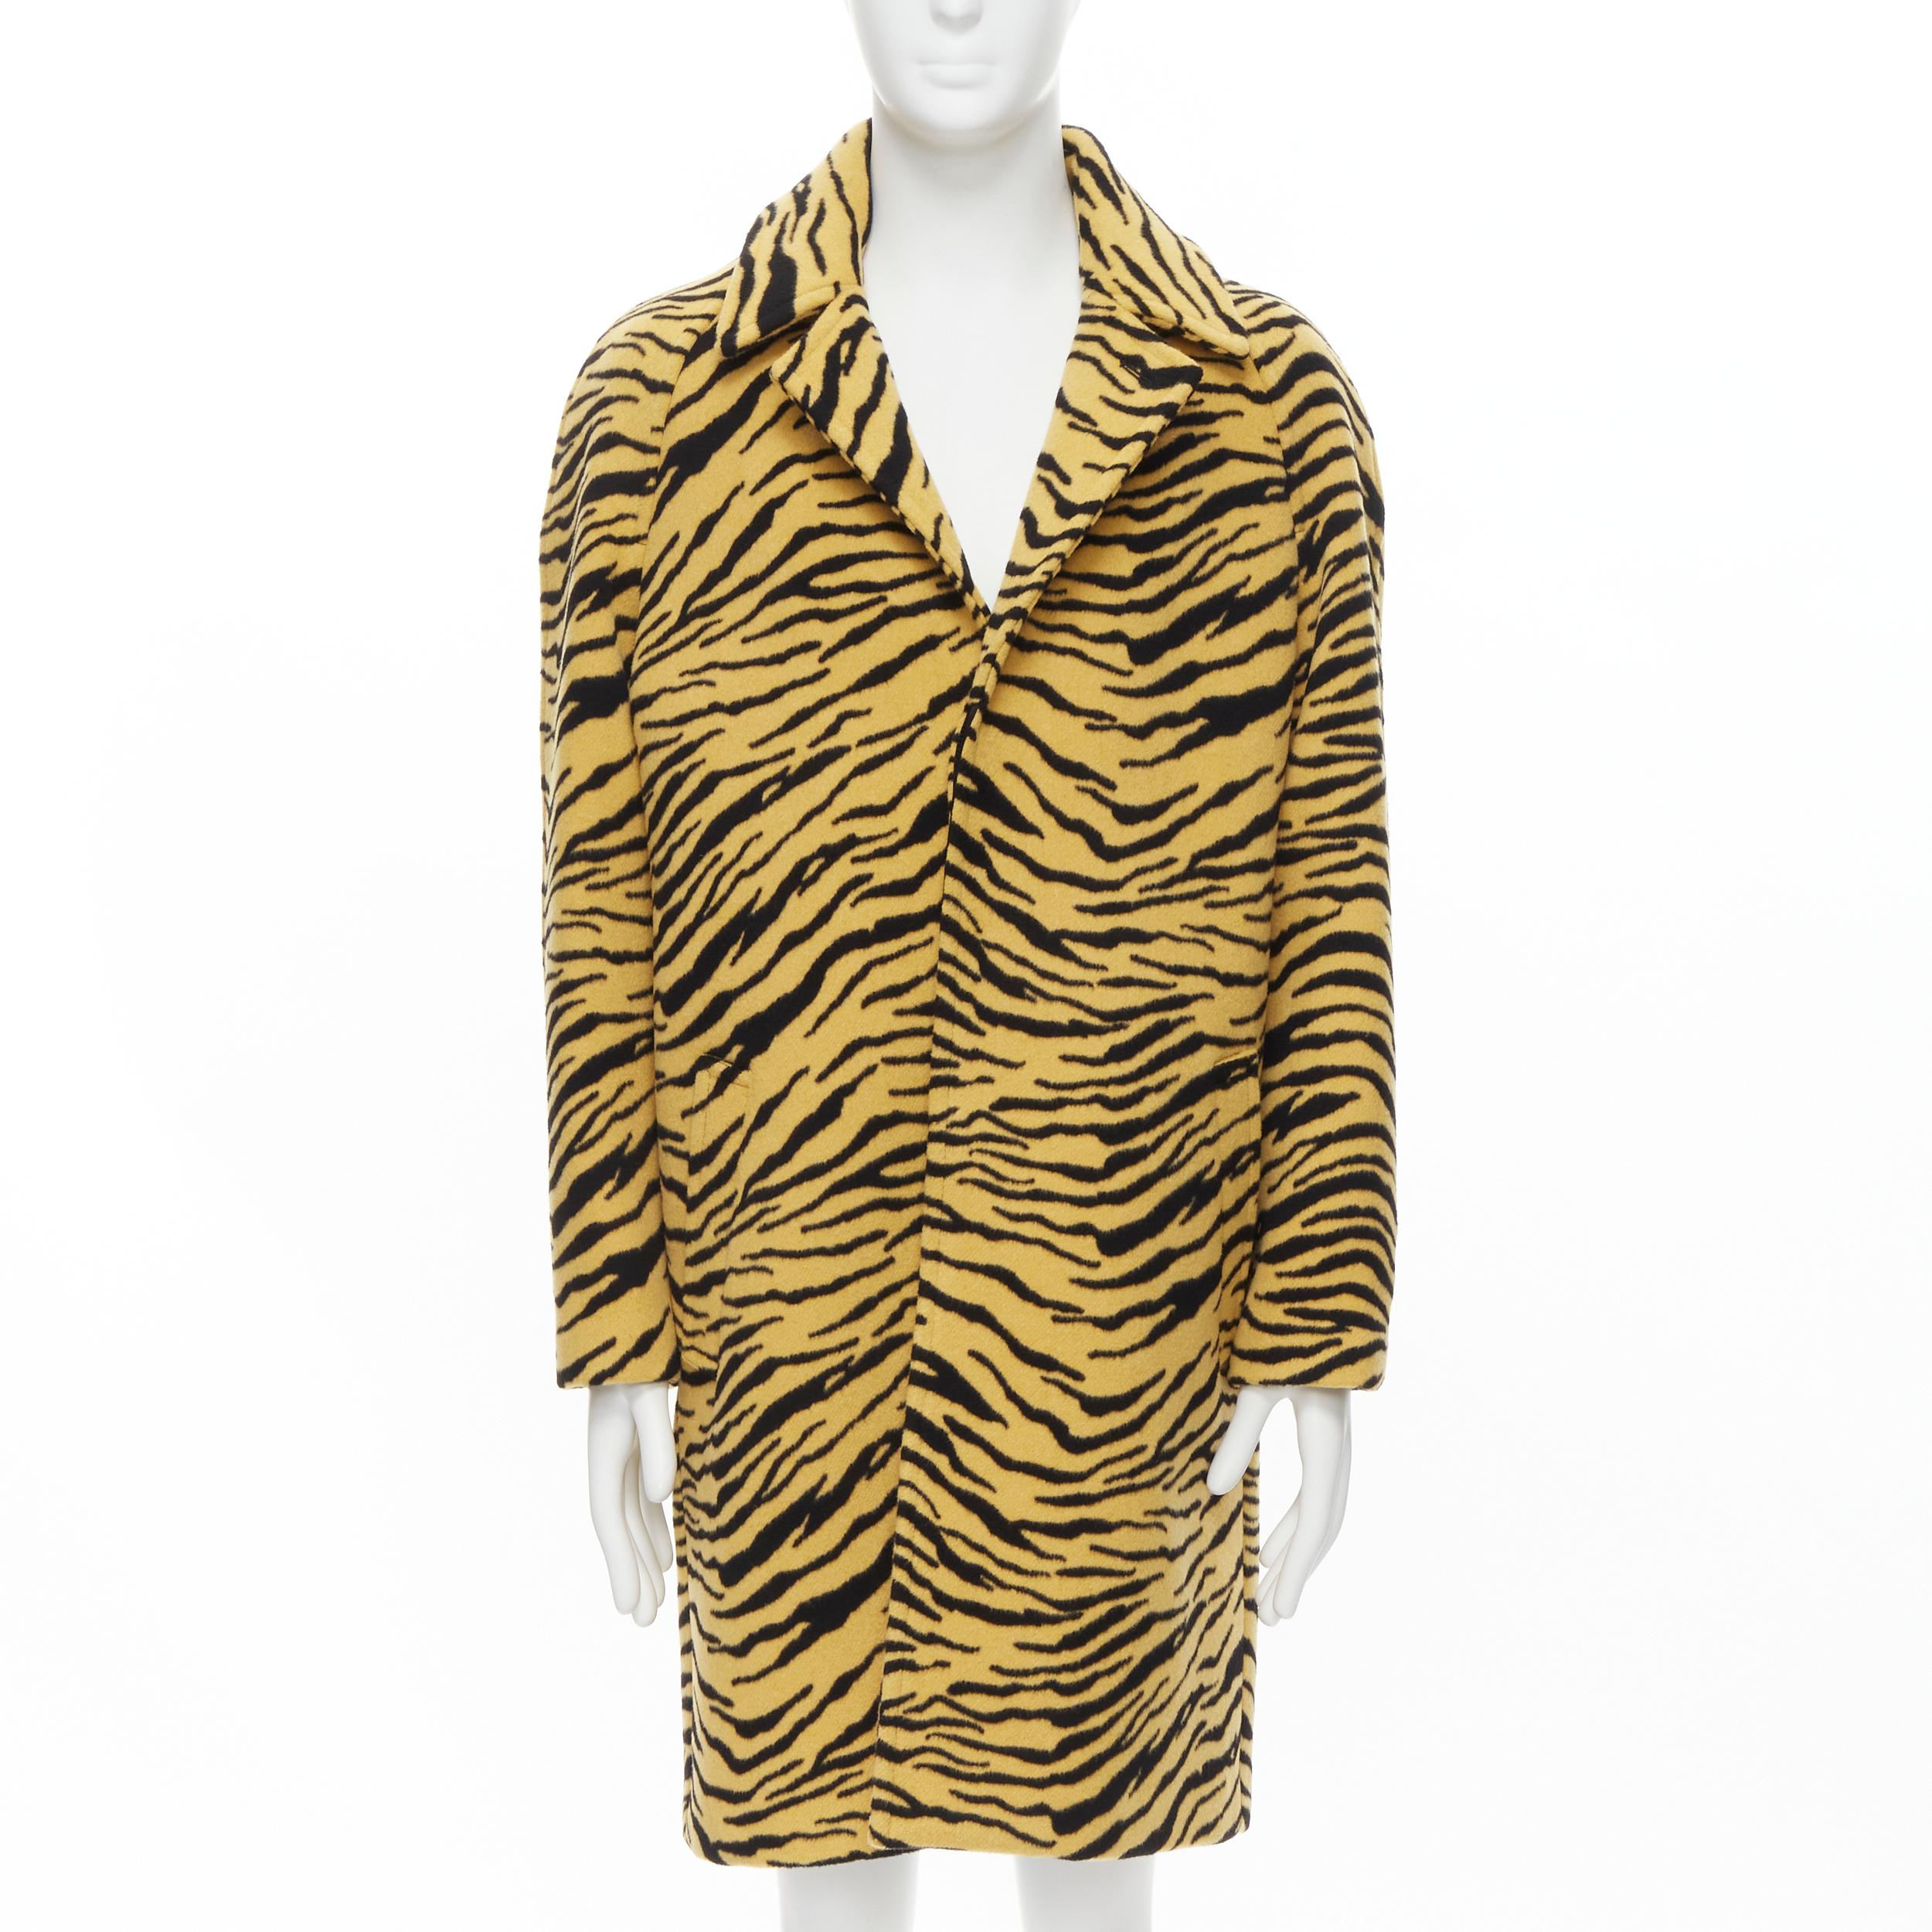 new CELINE Hedi Slimane 2019 Runway wool felt yellow black tiger coat EU48 M
Reference: TGAS/B01976
Brand: Celine
Designer: Hedi Slimane
Collection: Fall Winter 2019 Runway
Material: Wool
Color: Yellow
Pattern: Striped
Closure: Button
Extra Detail: